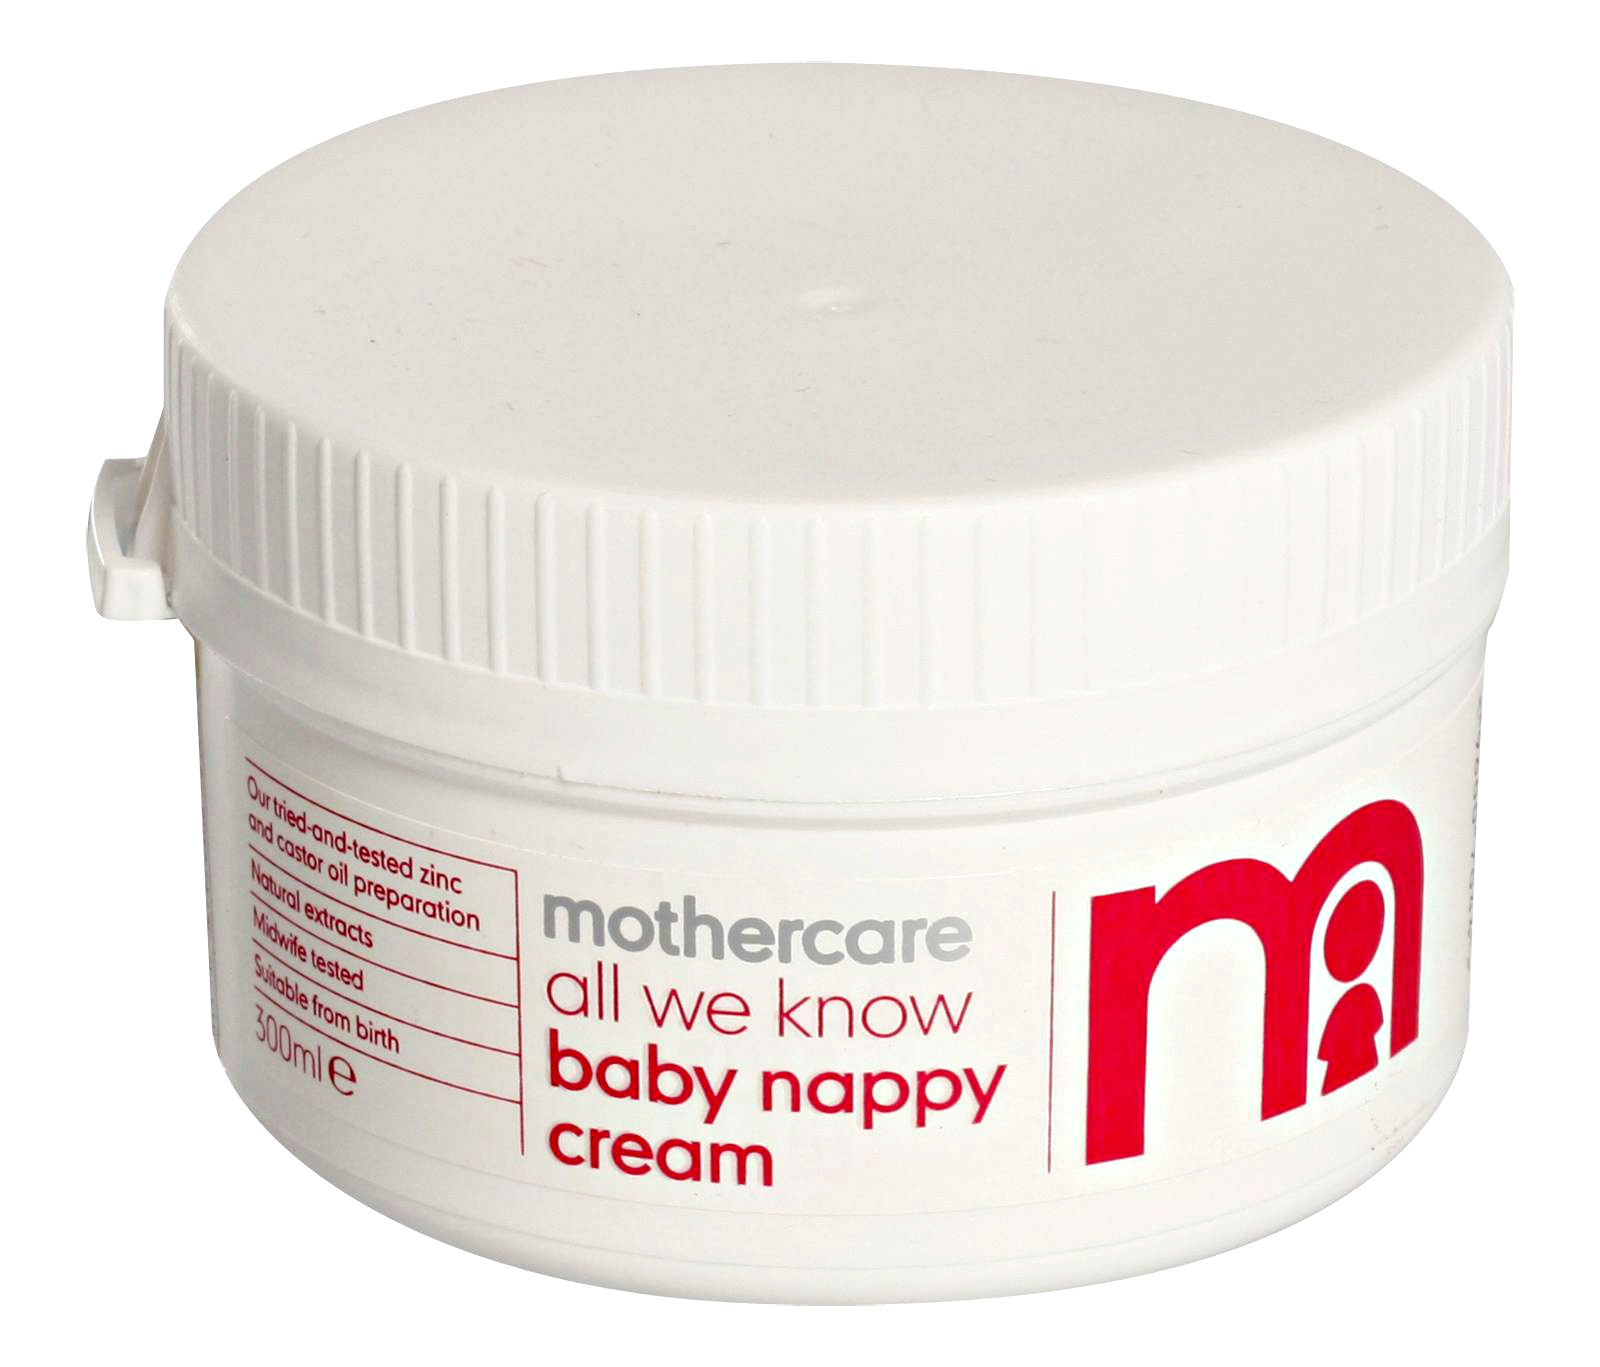 Mothercare - All We Know Baby Nappy Cream